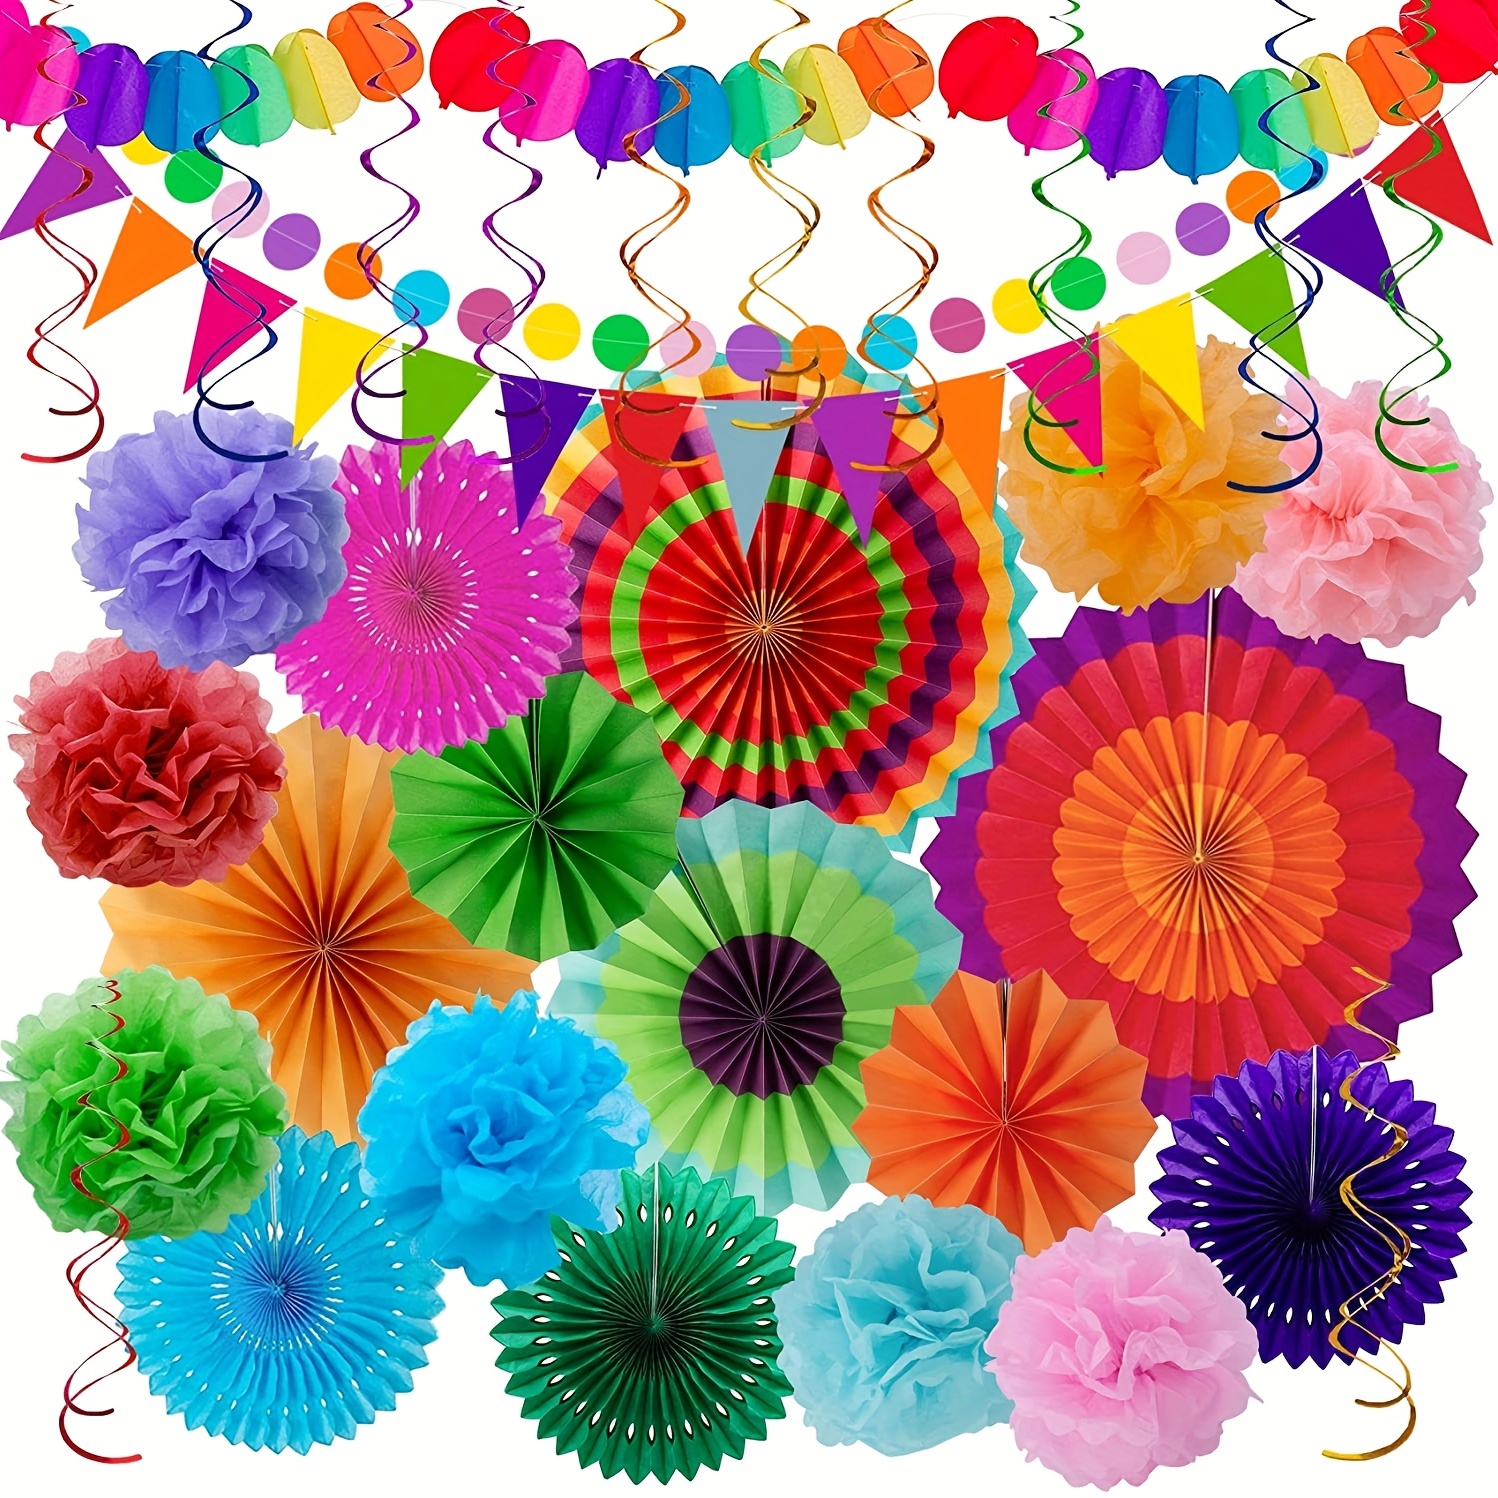 Fiesta Party Decorations Mexican Themed Party Decorations Supplies